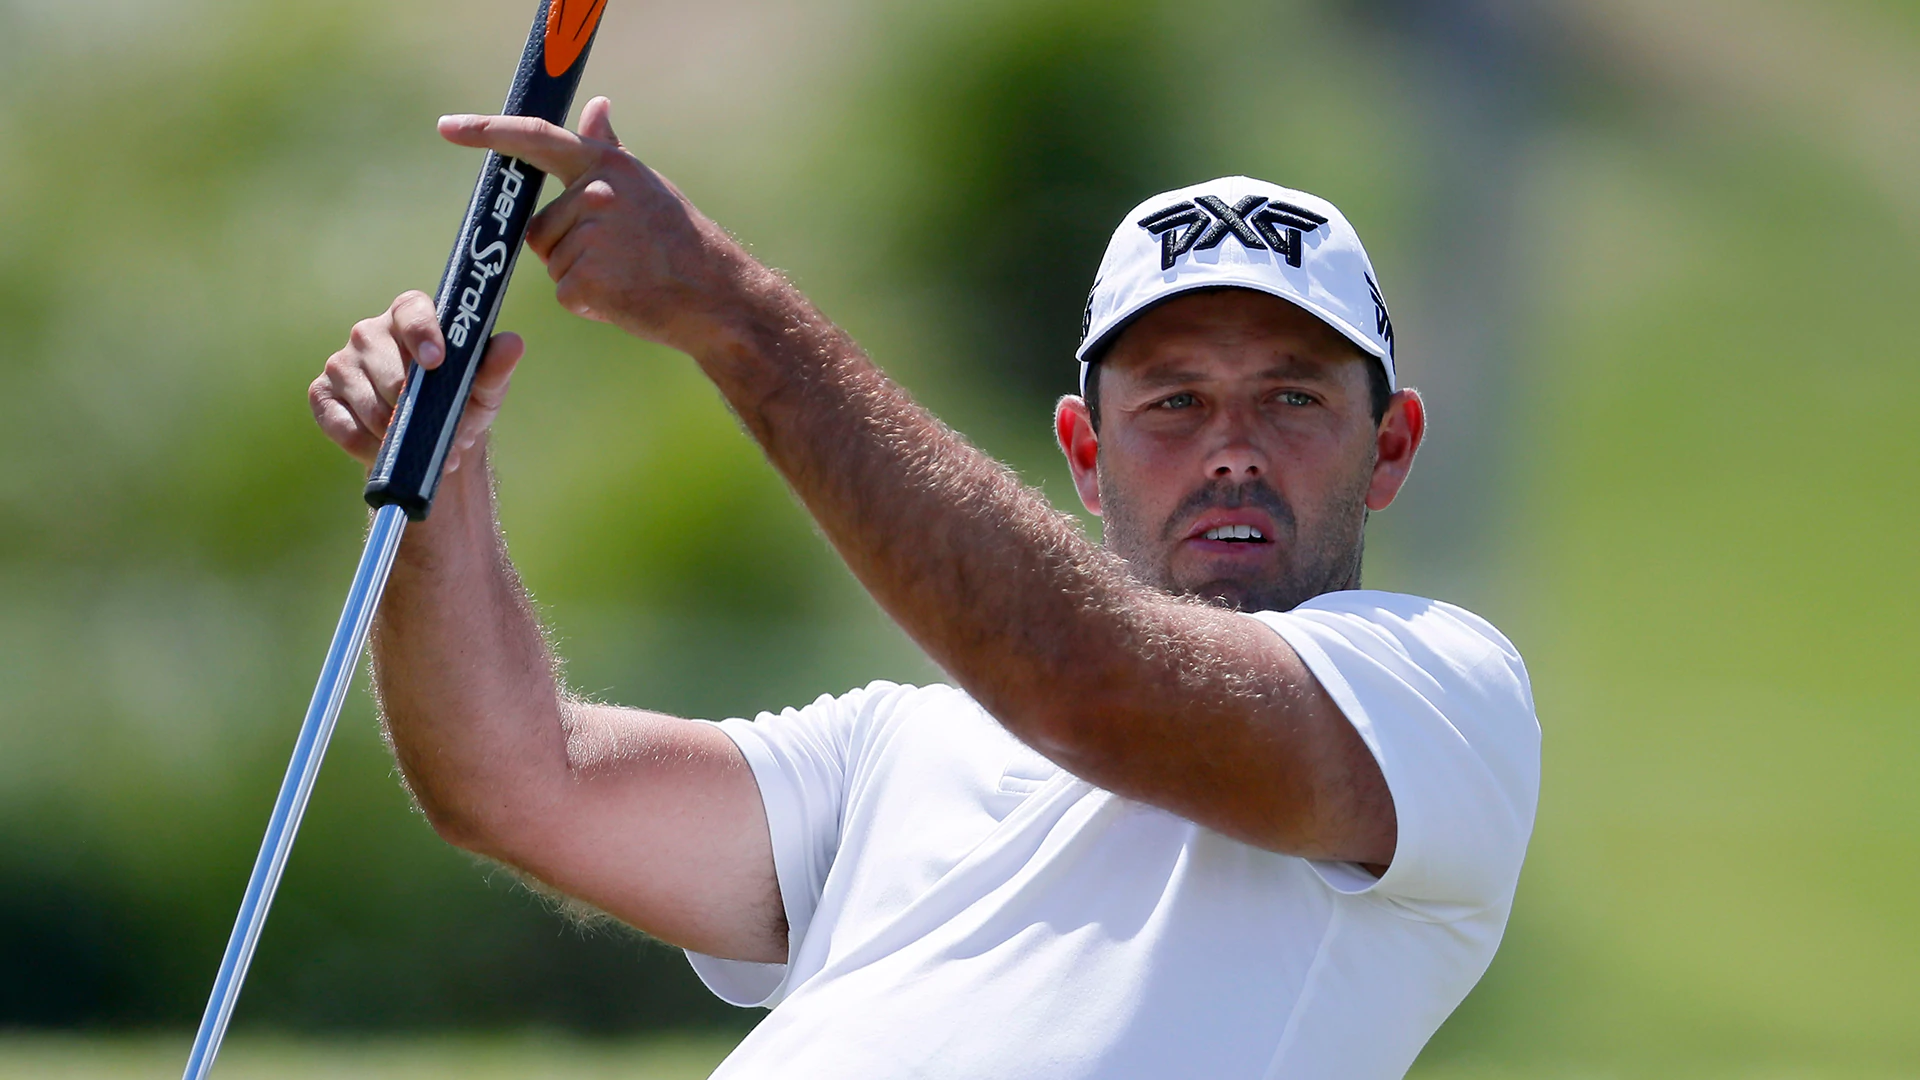 Schwartzel gets angry at official: 'You really think that's fair?'